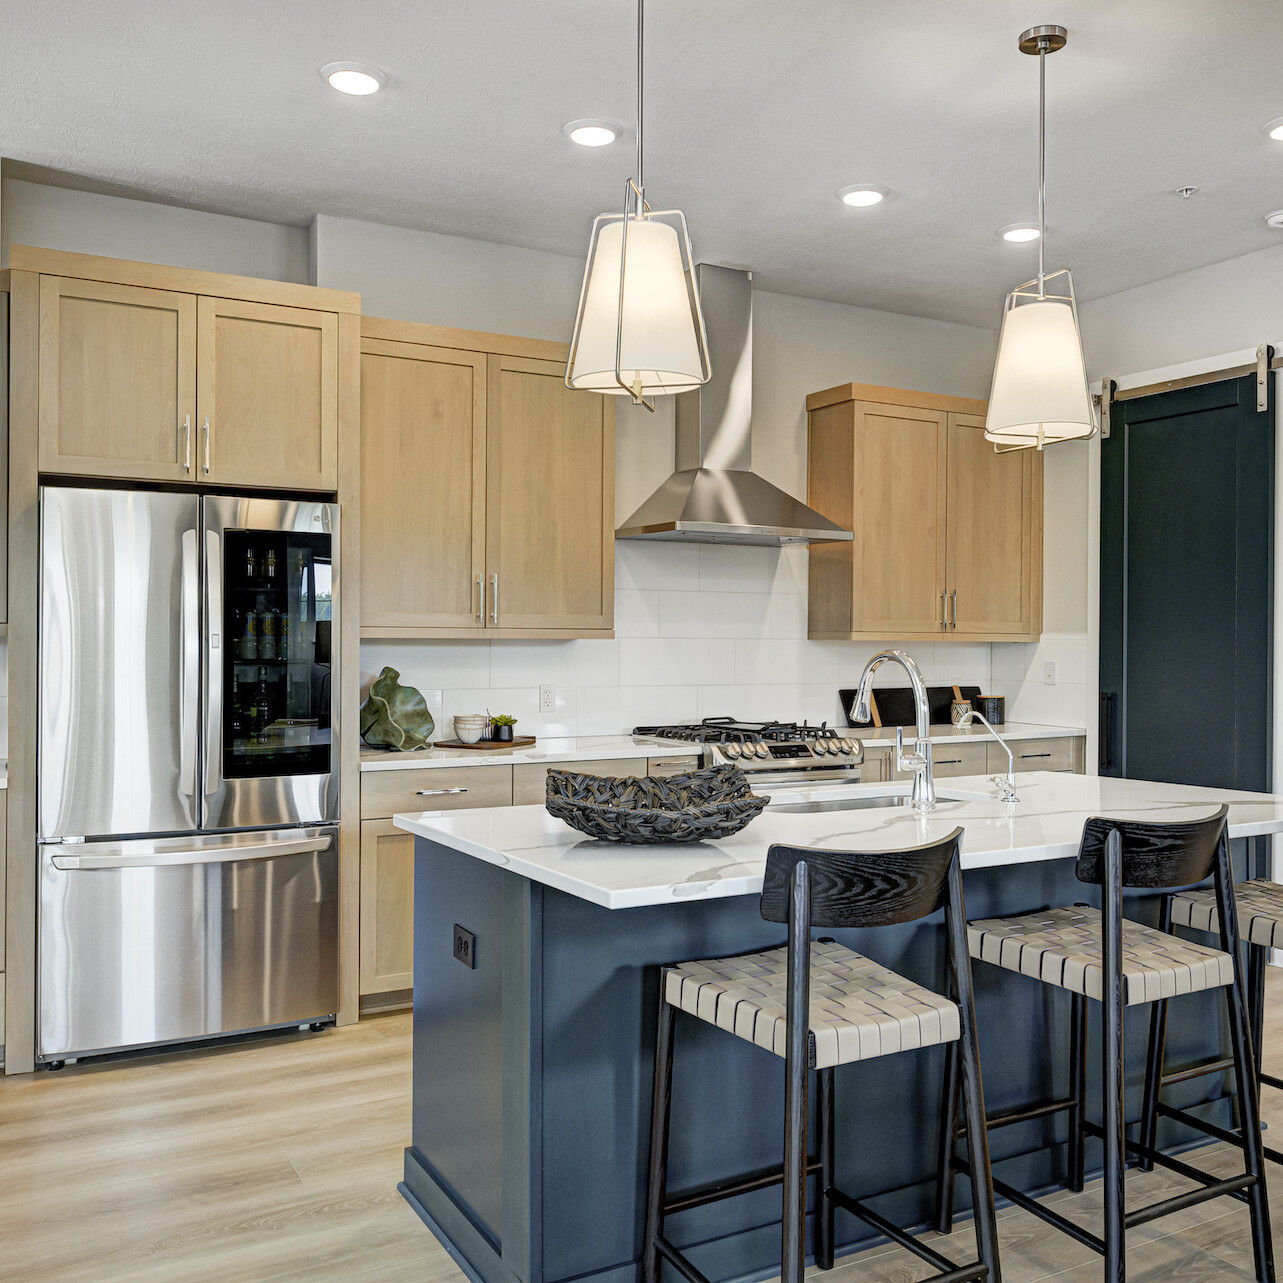 Custom Home Builder Carmel Indiana: A kitchen with a center island and bar stools.